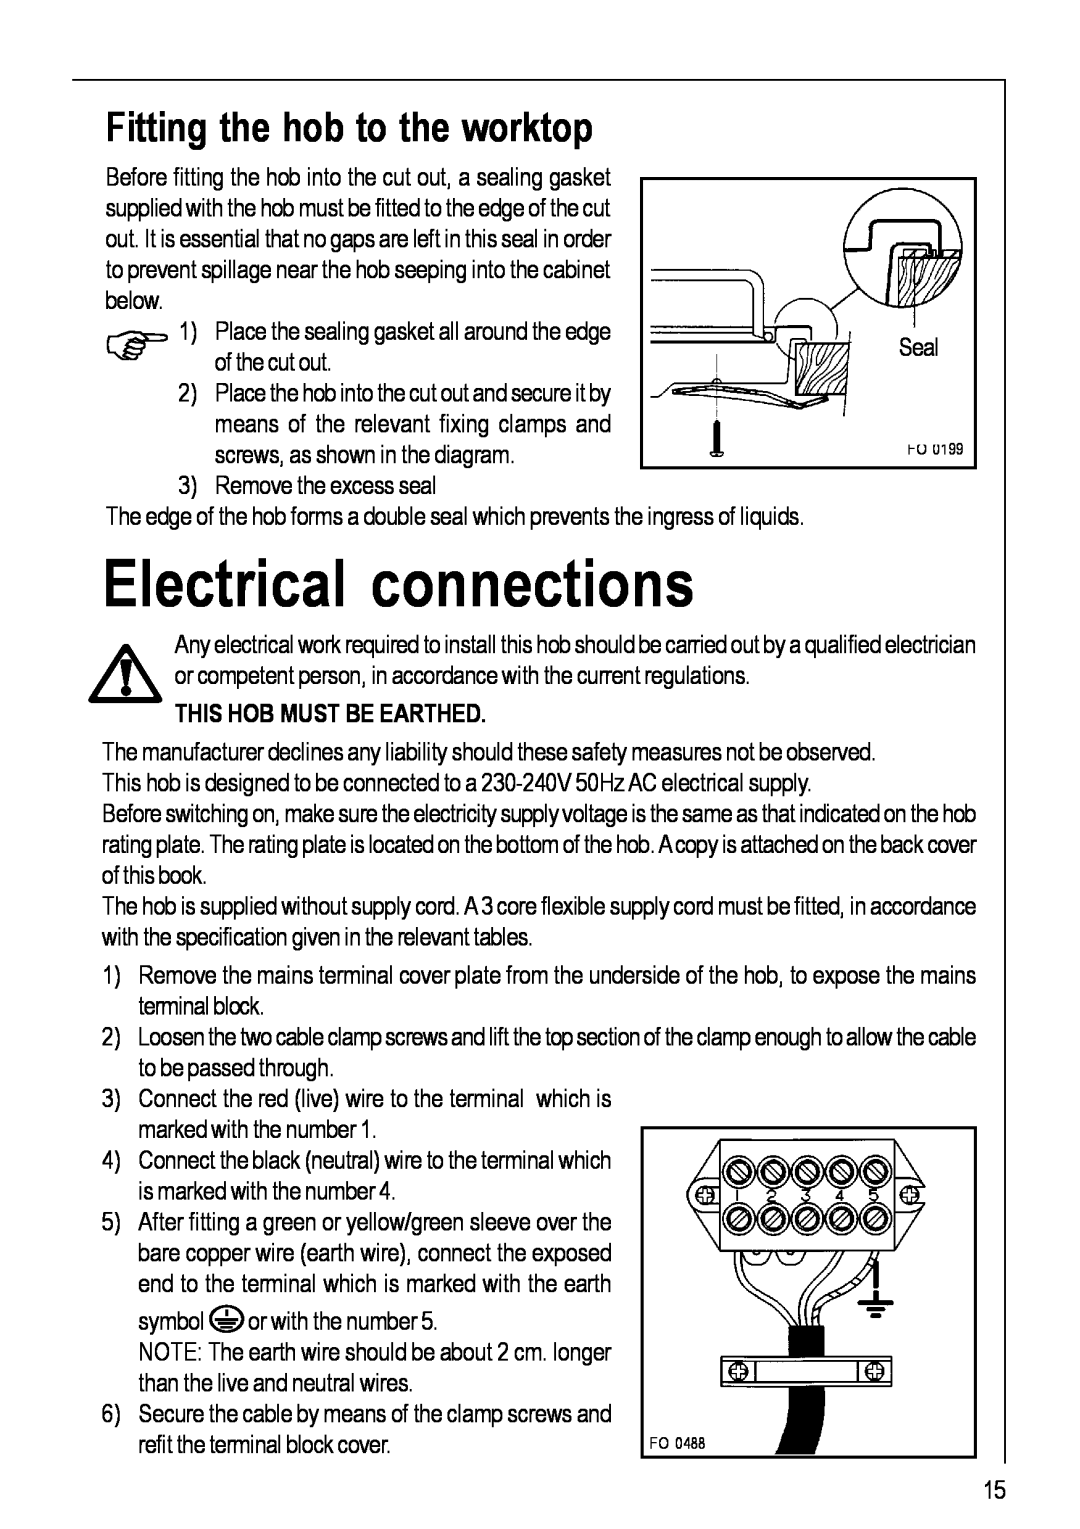 Electrolux 111 K operating instructions Electrical connections, Fitting the hob to the worktop 